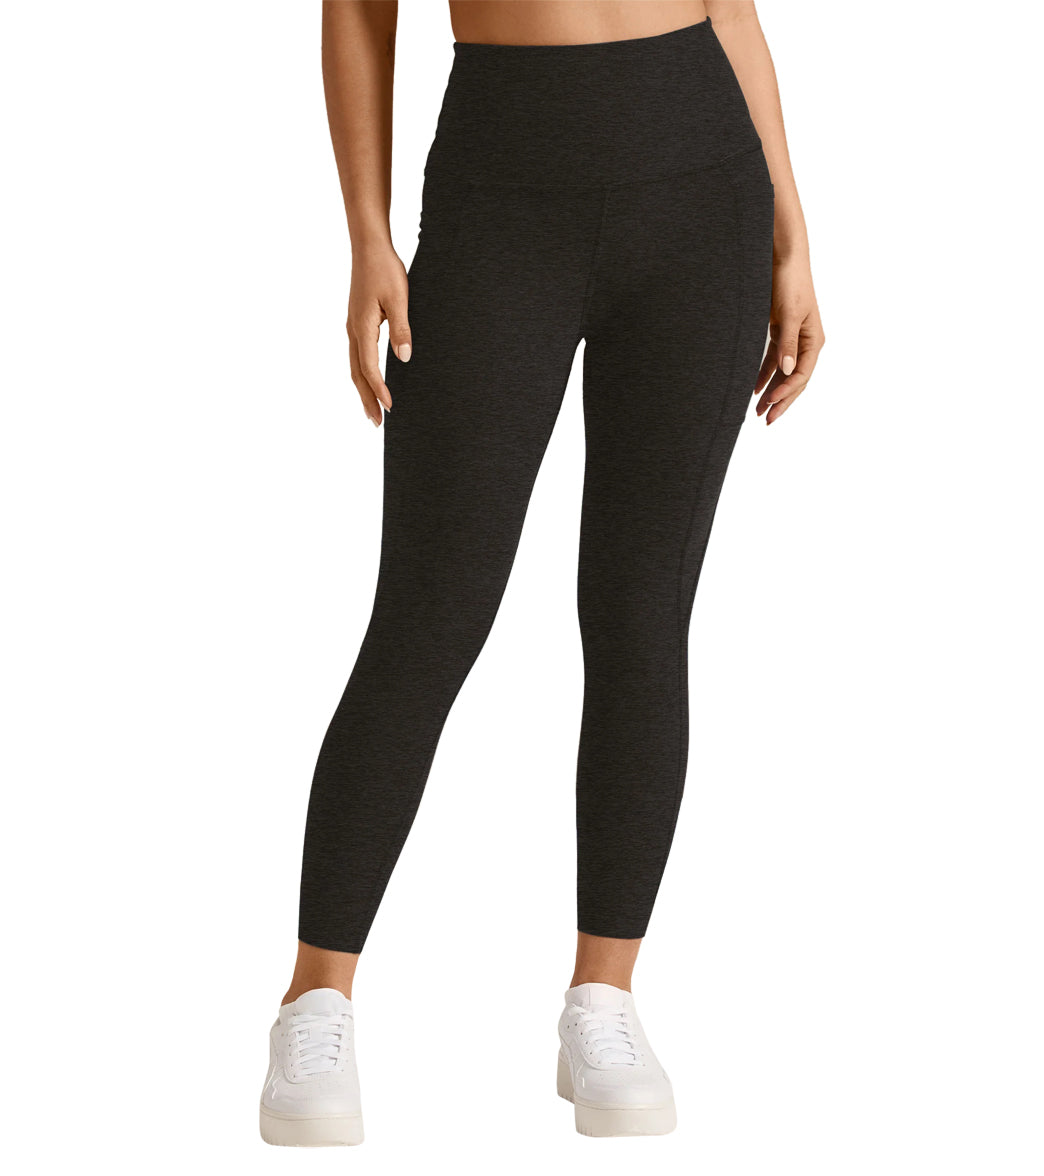 Only 38.80 usd for Beyond Yoga Spacedye Out Of Pocket High Waisted Capri  Legging Darkest Night Online at the Shop